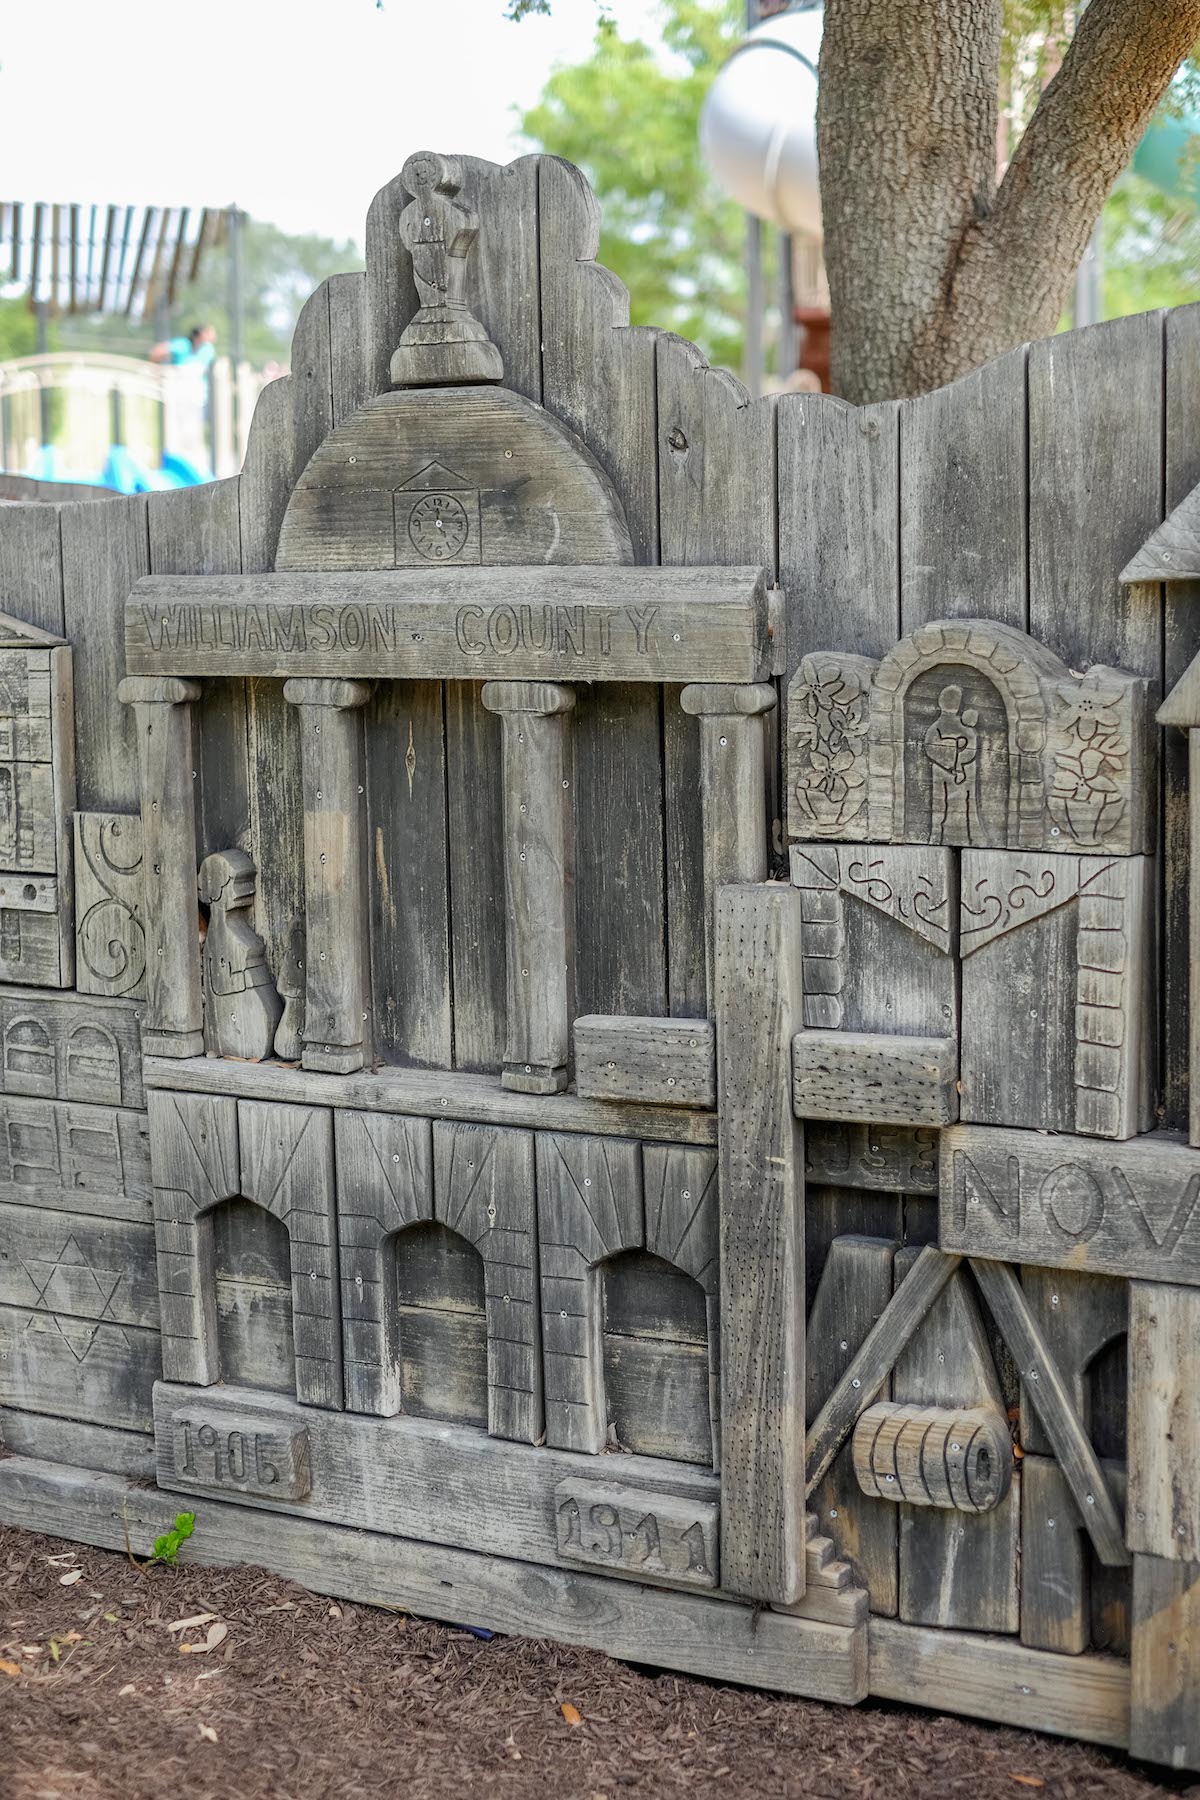 Carved wood panels from the original playground are integrated into the new play area